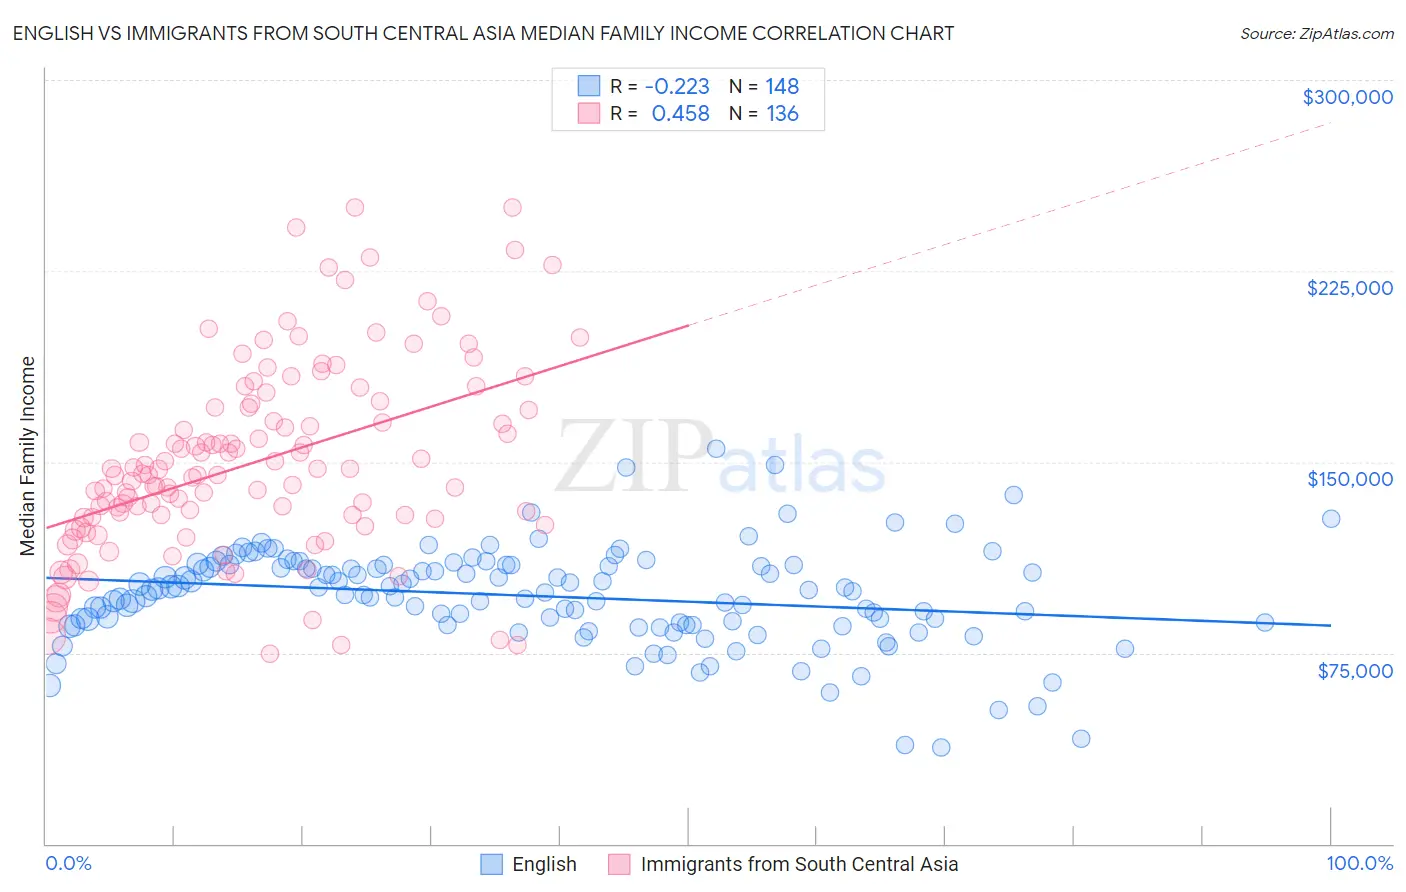 English vs Immigrants from South Central Asia Median Family Income